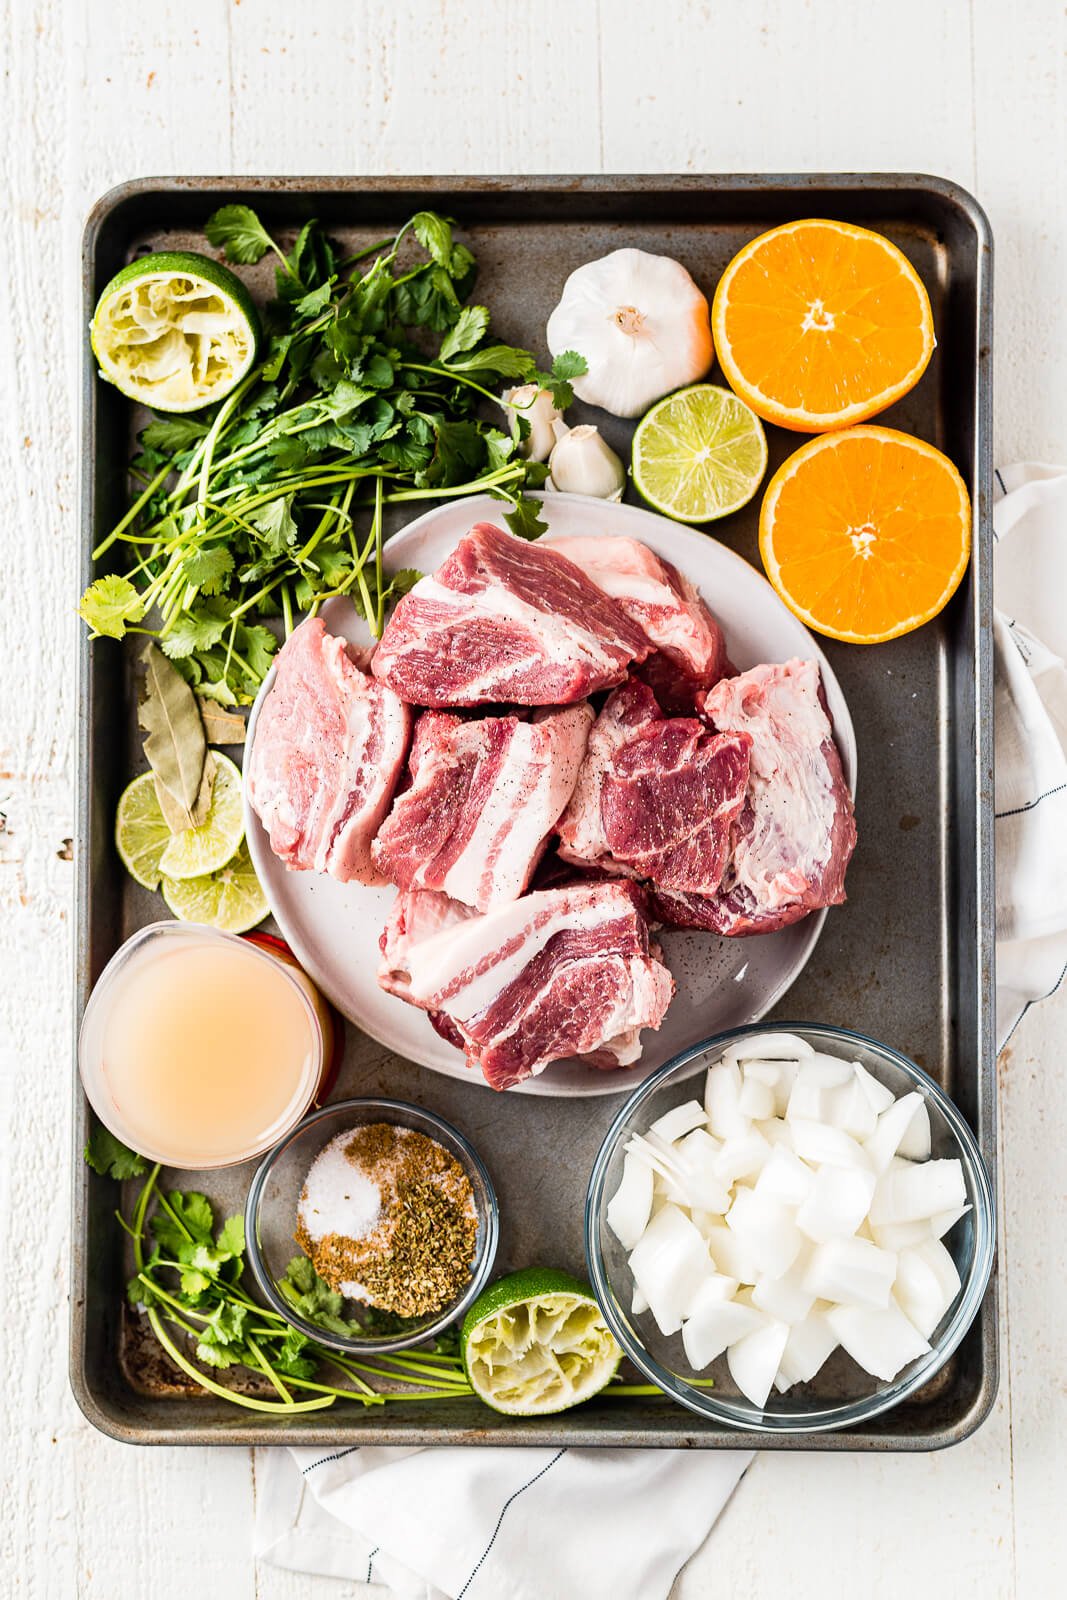 a large sheet pan with all of the ingredients for instant pot pork carnitas including pork shoulder, onion, oranges, limes, spices and garlic